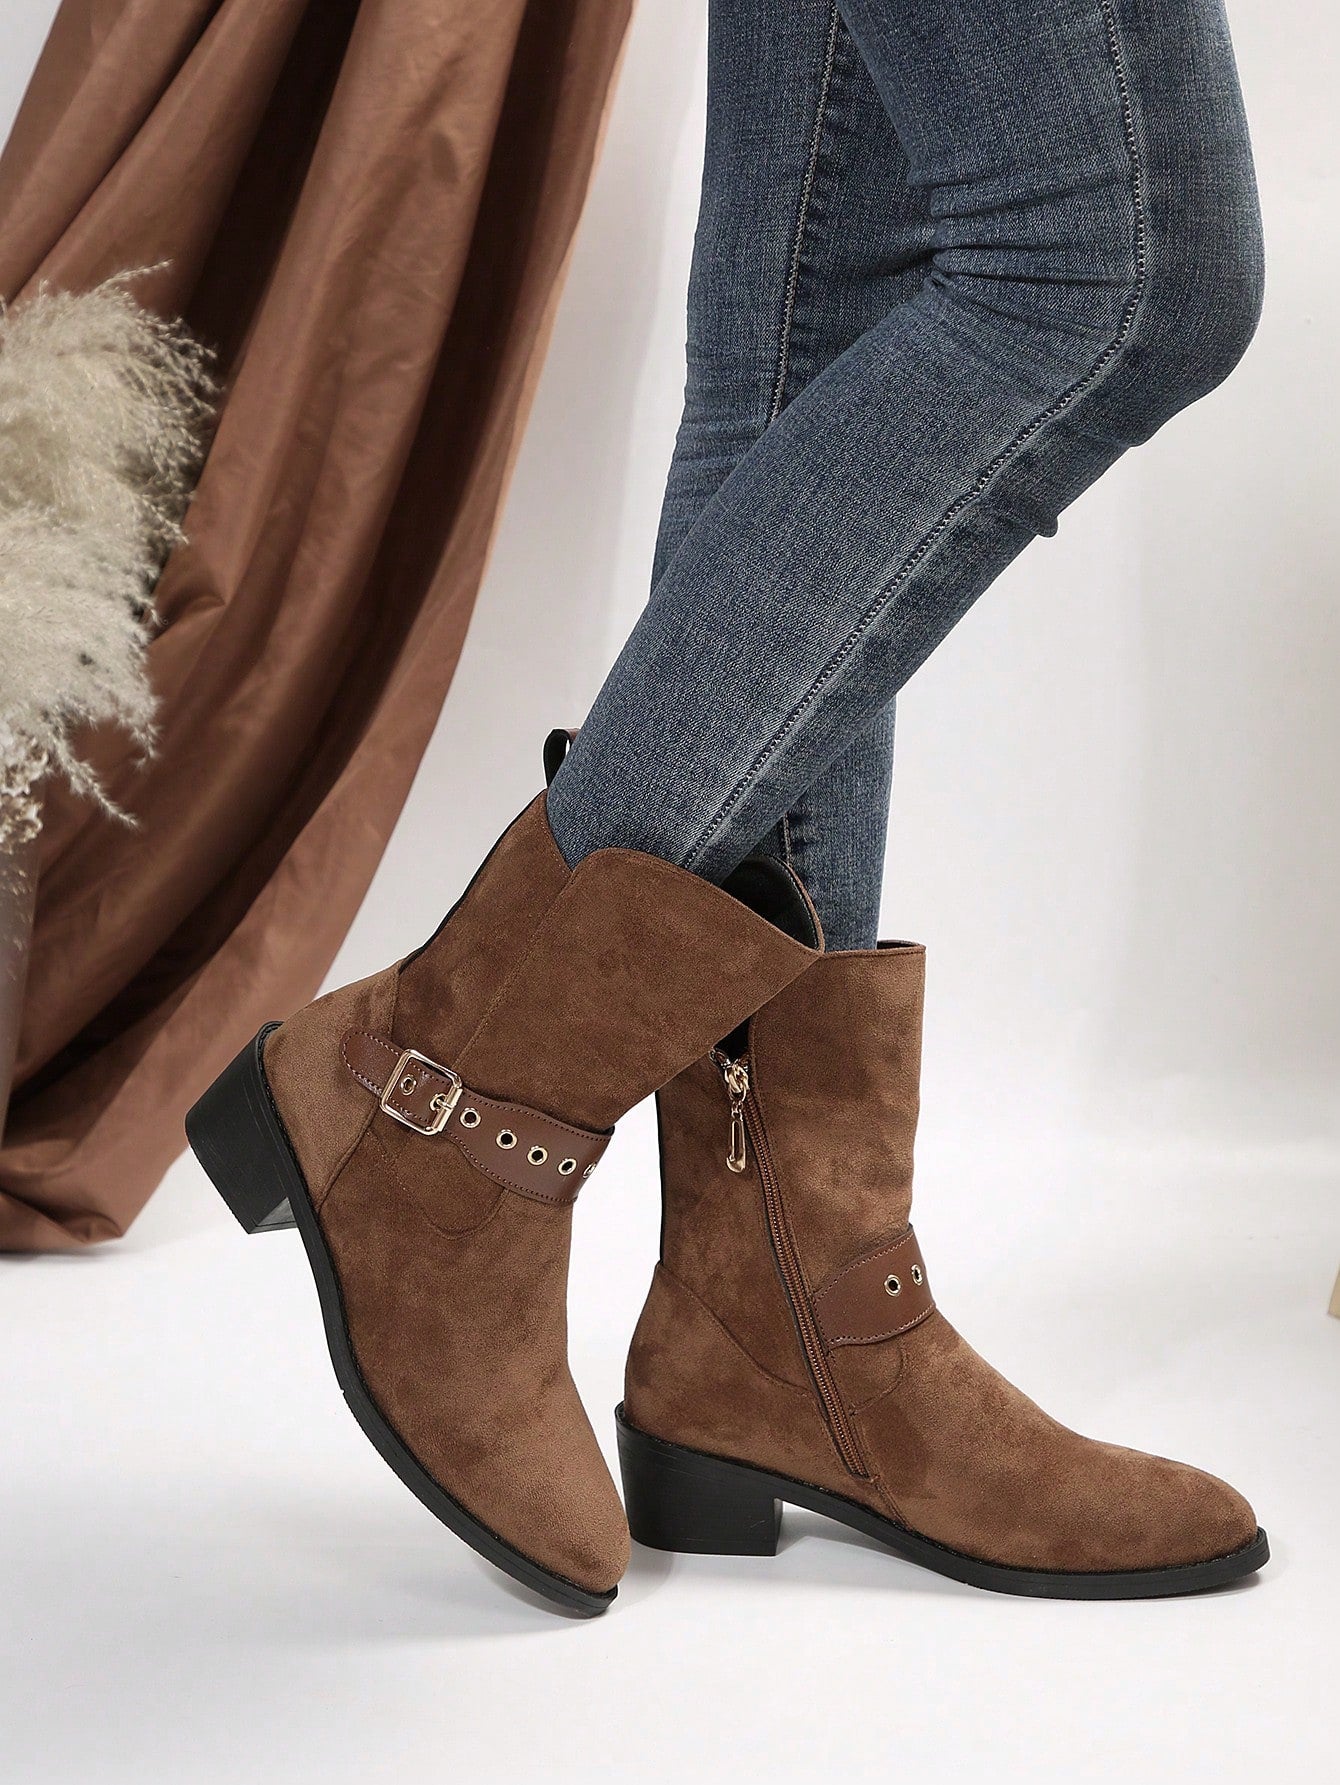 Chunky Heel Mid-calf Knight Boots For Women, New Vintage Suede Western Style Fashion Boots, Spring And Autumn-Brown-1